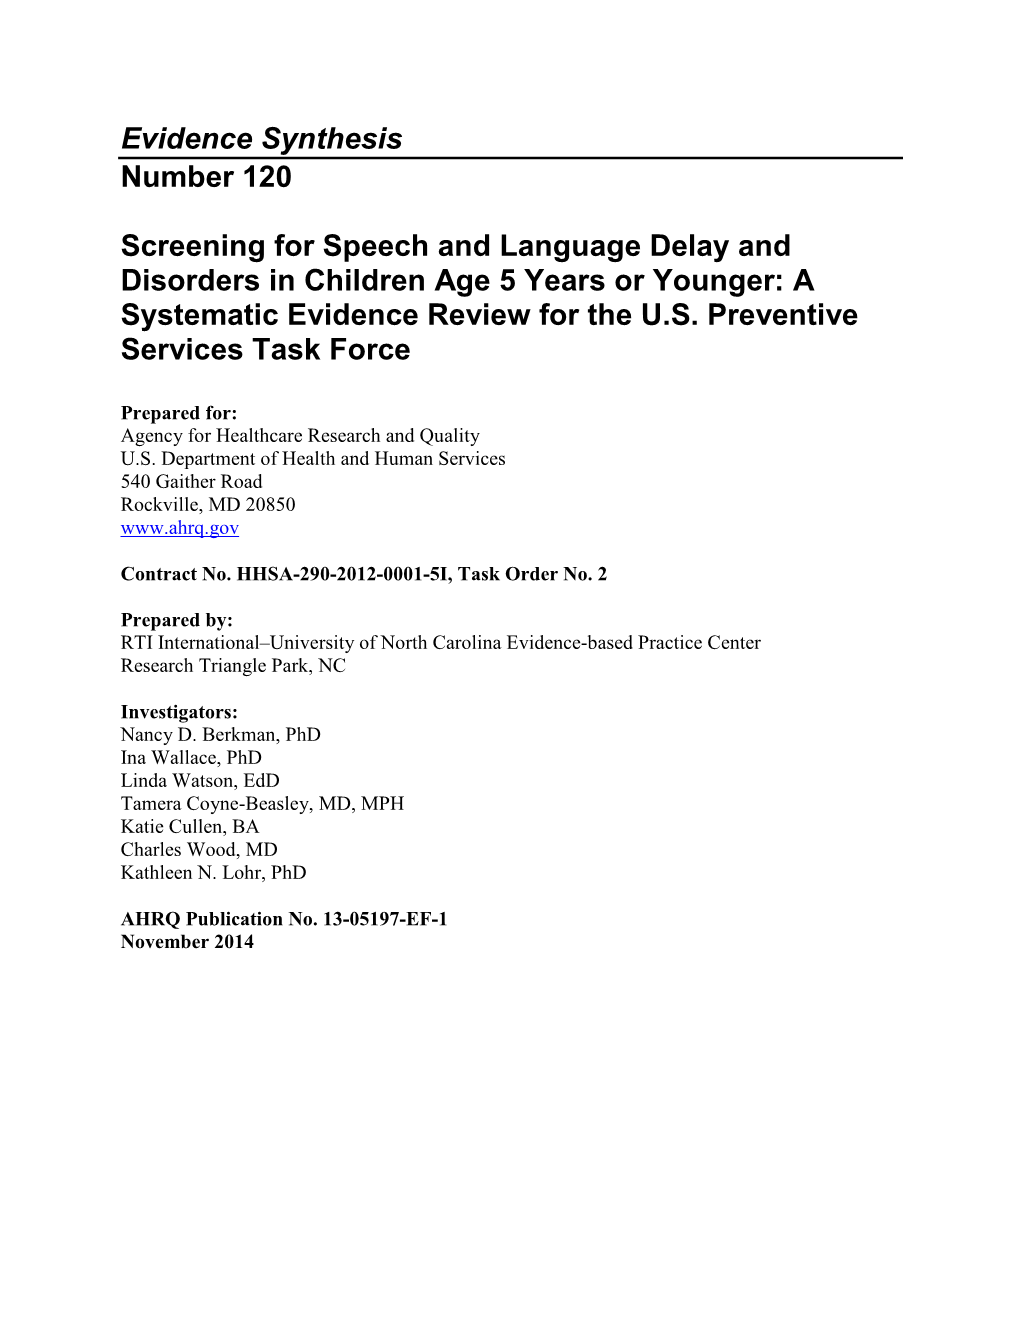 Screening for Speech and Language Delay and Disorders in Children Age 5 Years Or Younger: a Systematic Evidence Review for the U.S